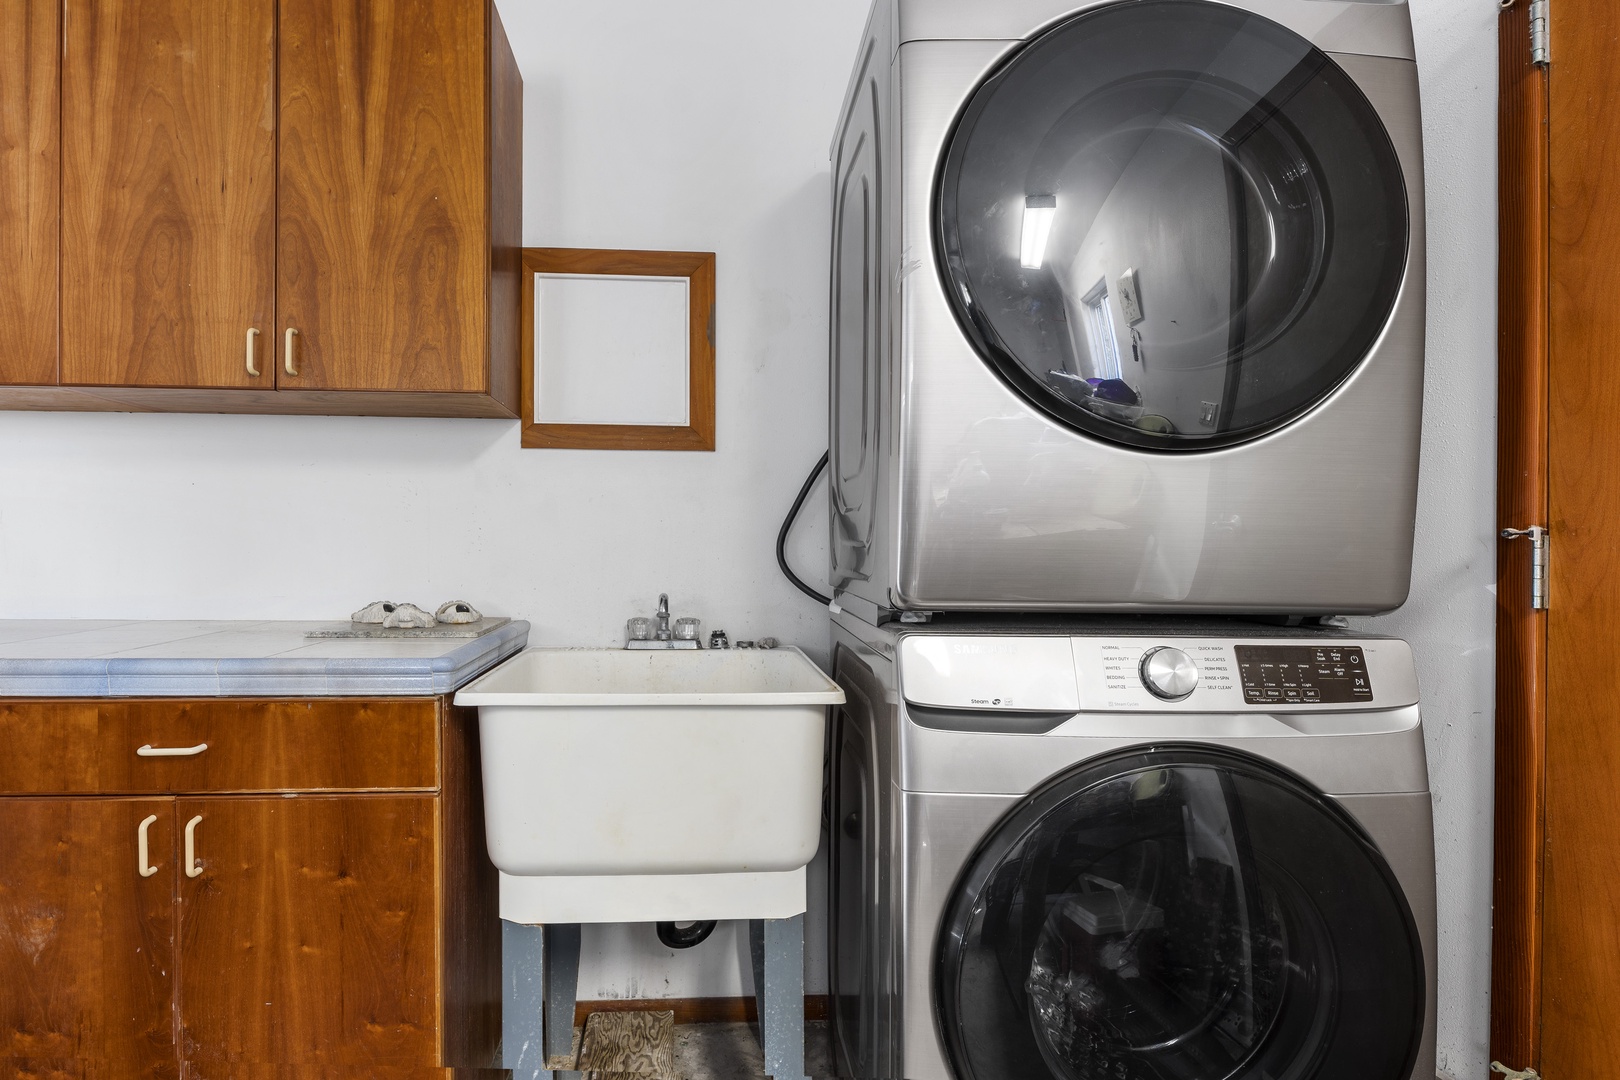 Kailua-Kona Vacation Rentals, Hale Kope Kai - Laundry on site for your convenience